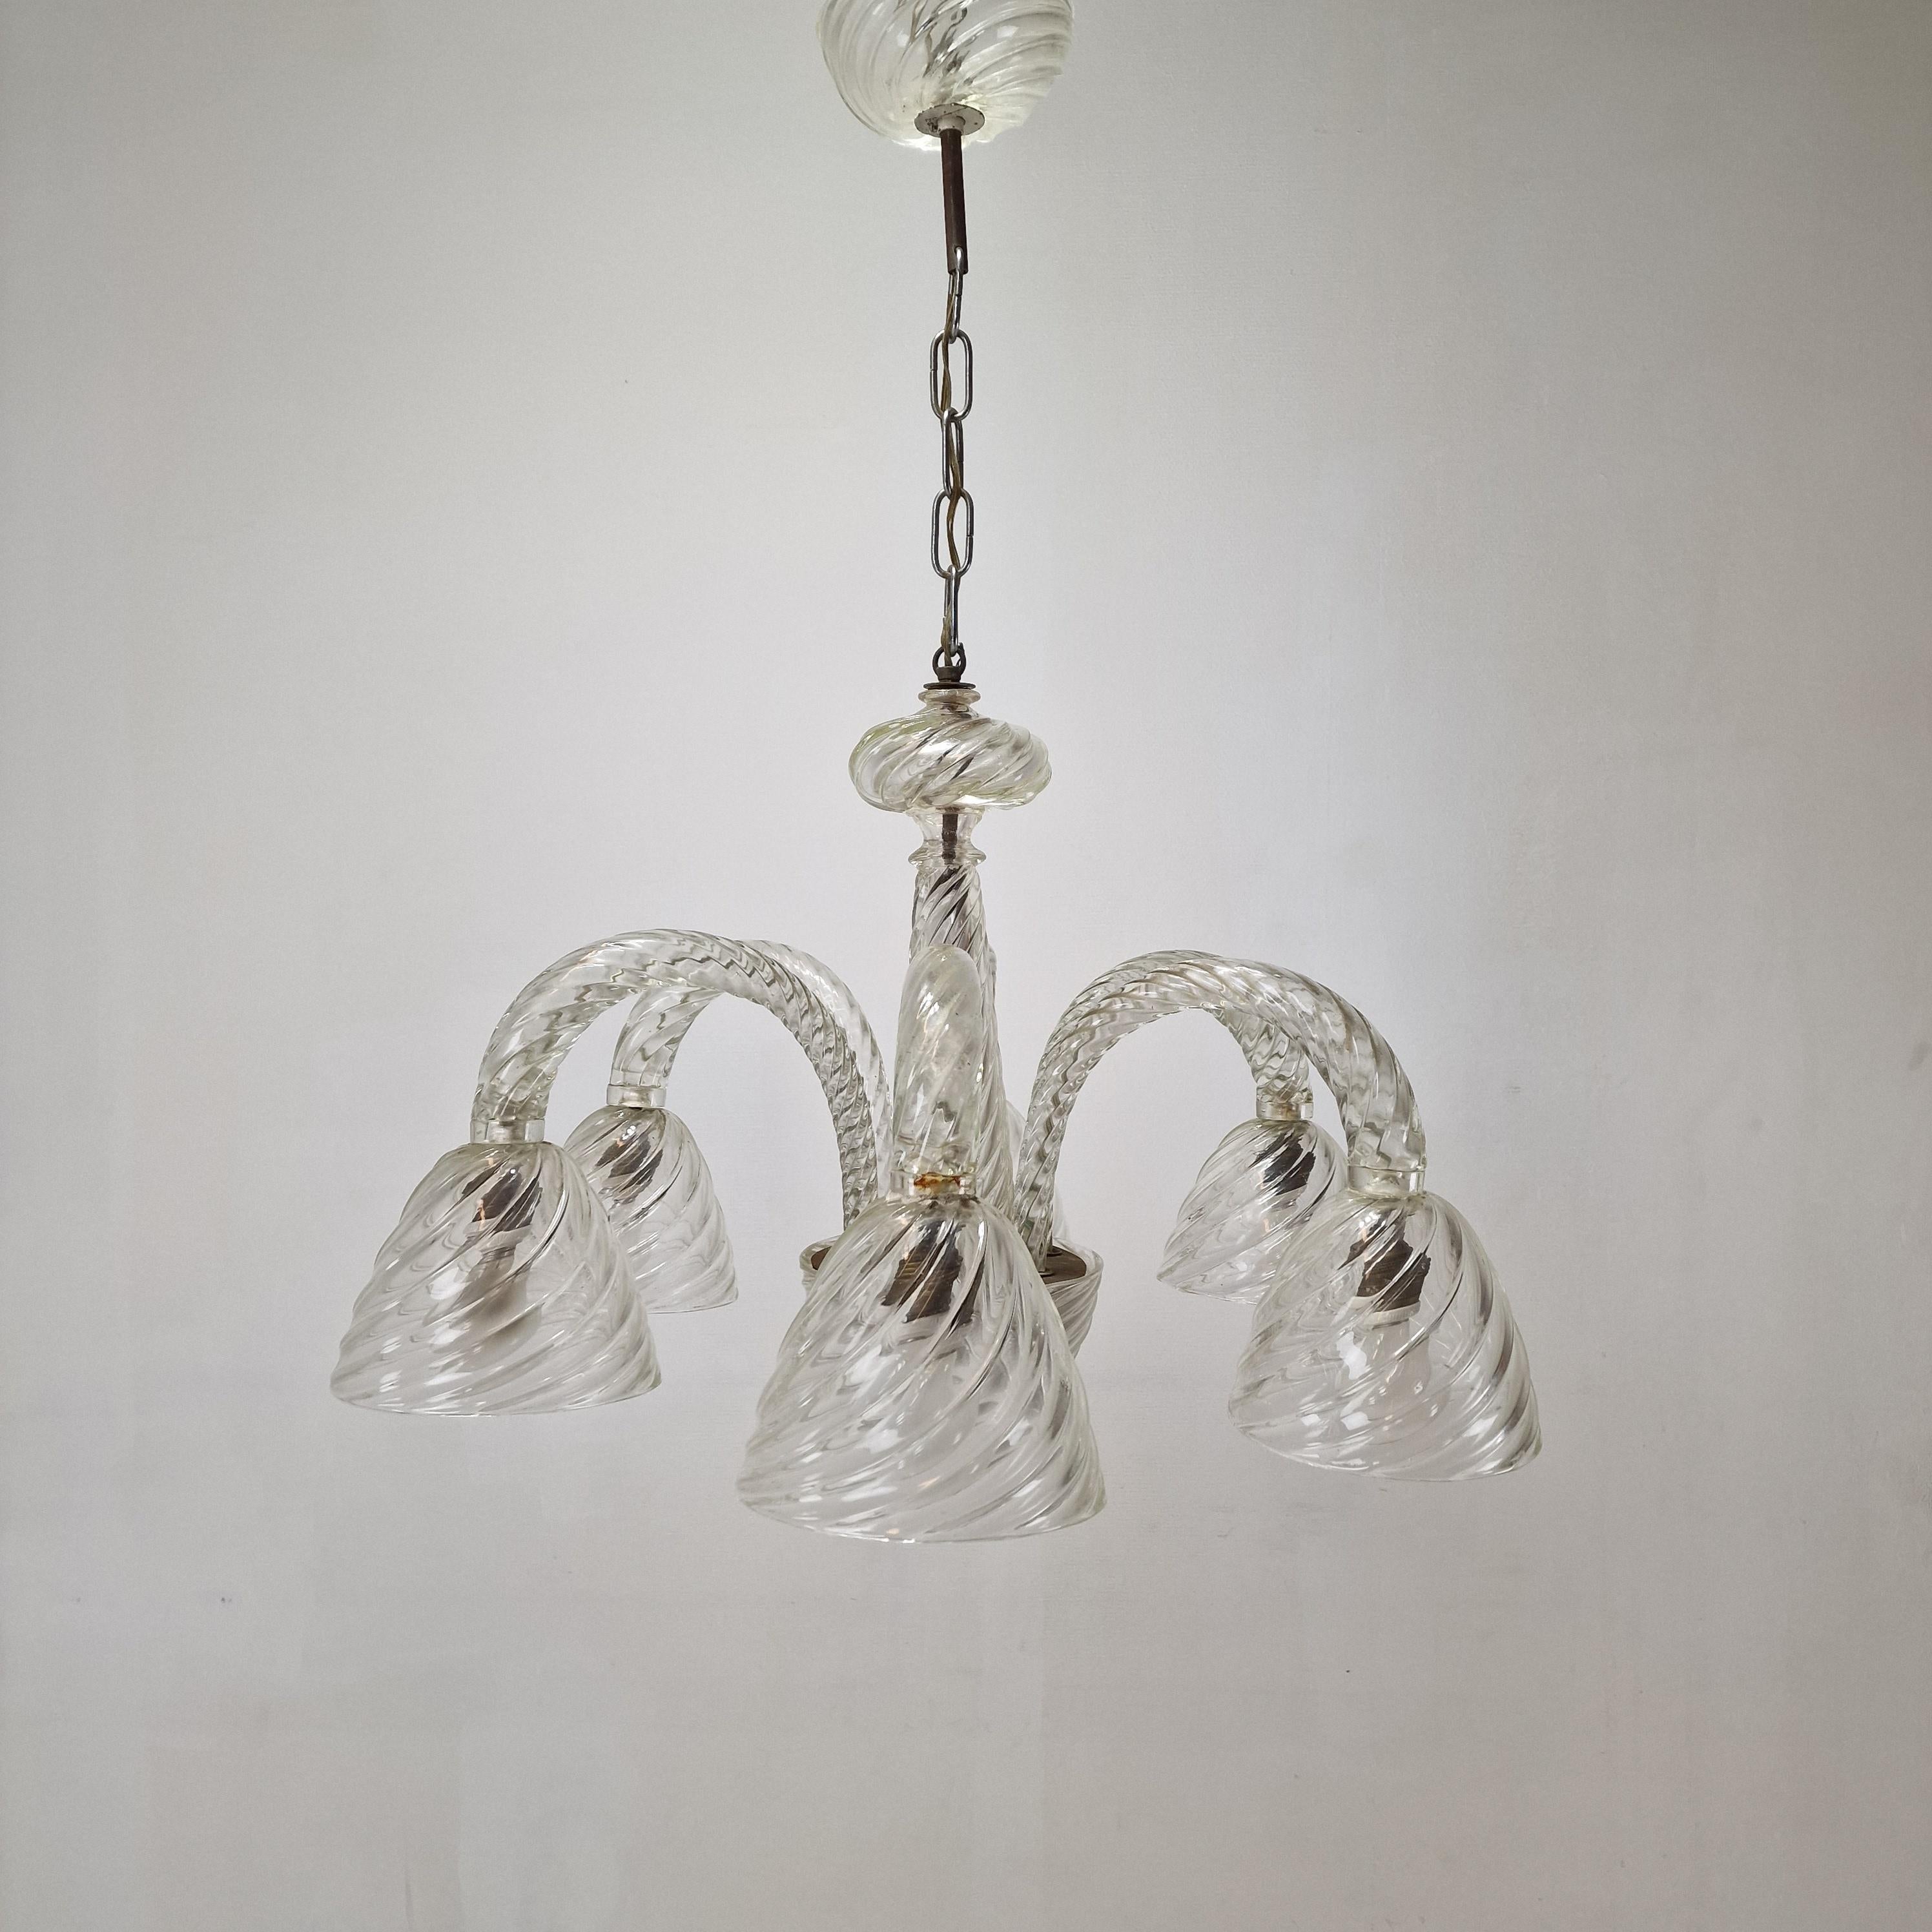 Mid-20th Century Barovier & Toso Murano Glass Chandelier, Italy 1950's For Sale